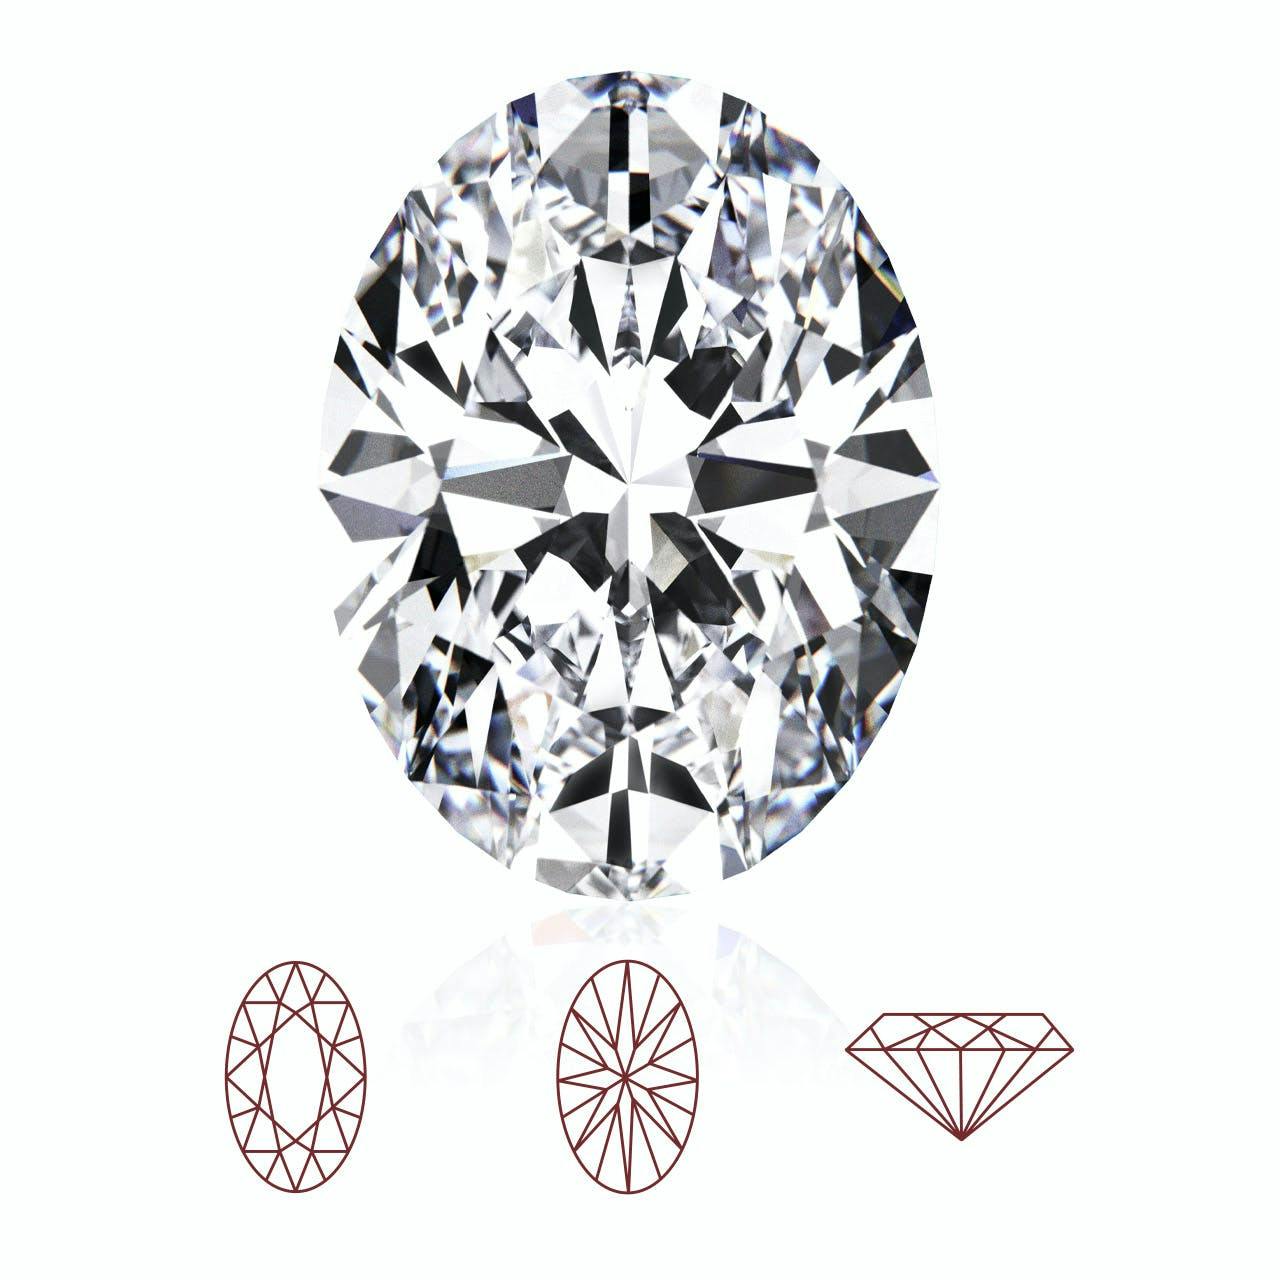 Oval cut among different types of diamond cut from different angles